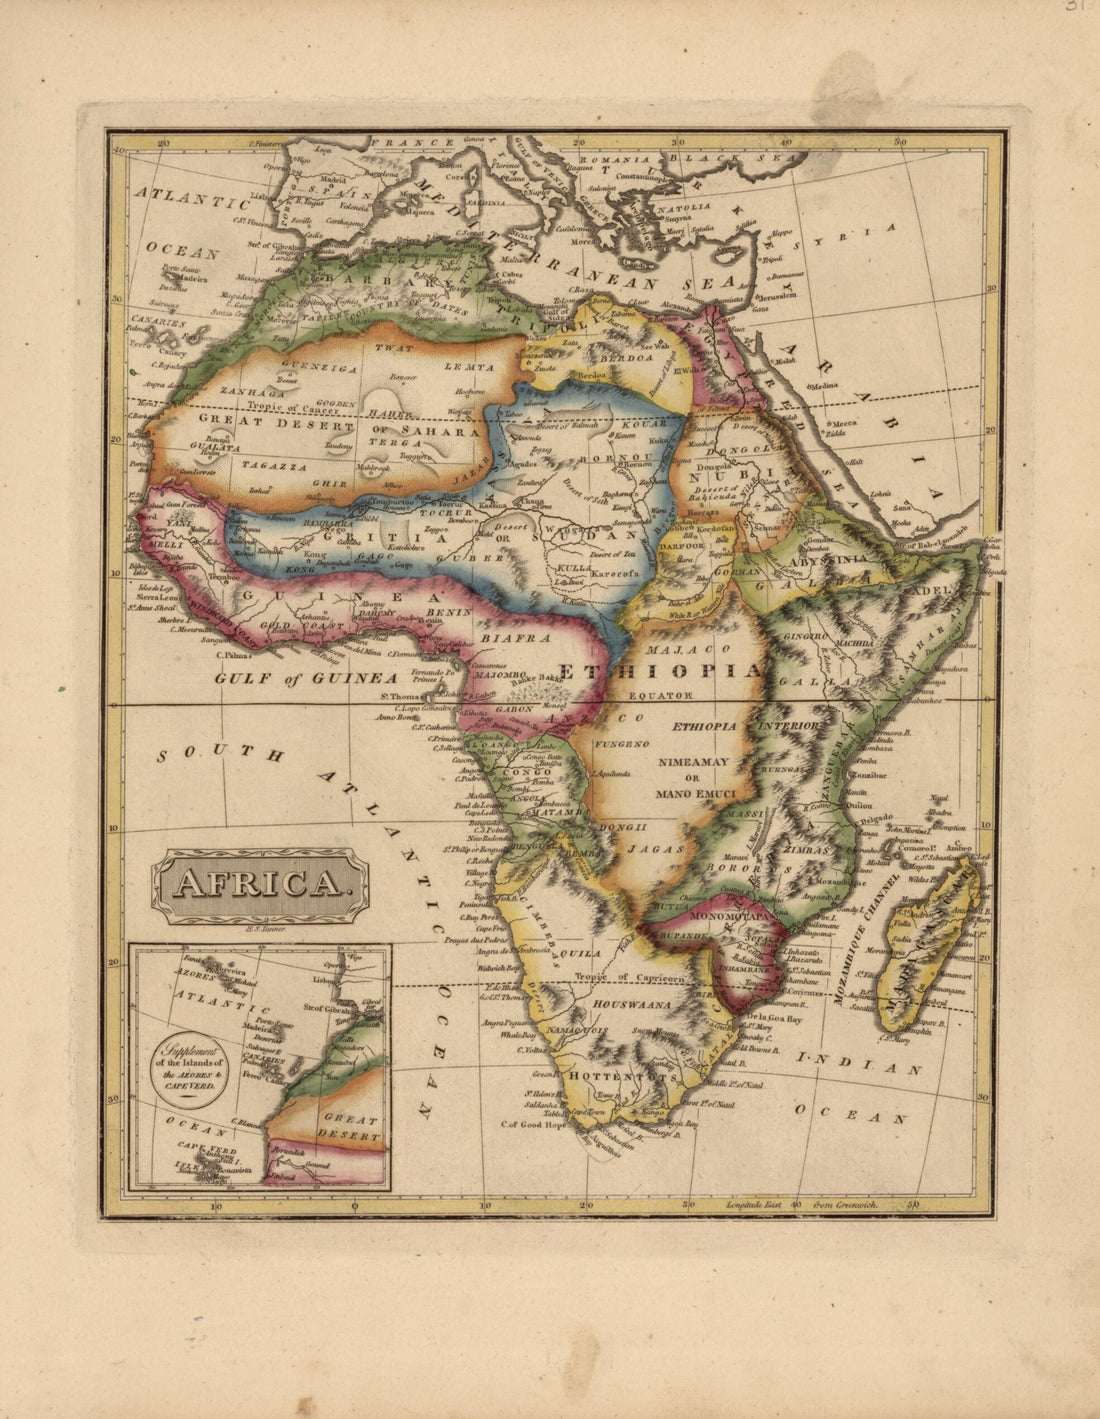 This old map of Africa from a New and Elegant General Atlas, Containing Maps of Each of the United States. from 1817 was created by Henry Schenck Tanner in 1817